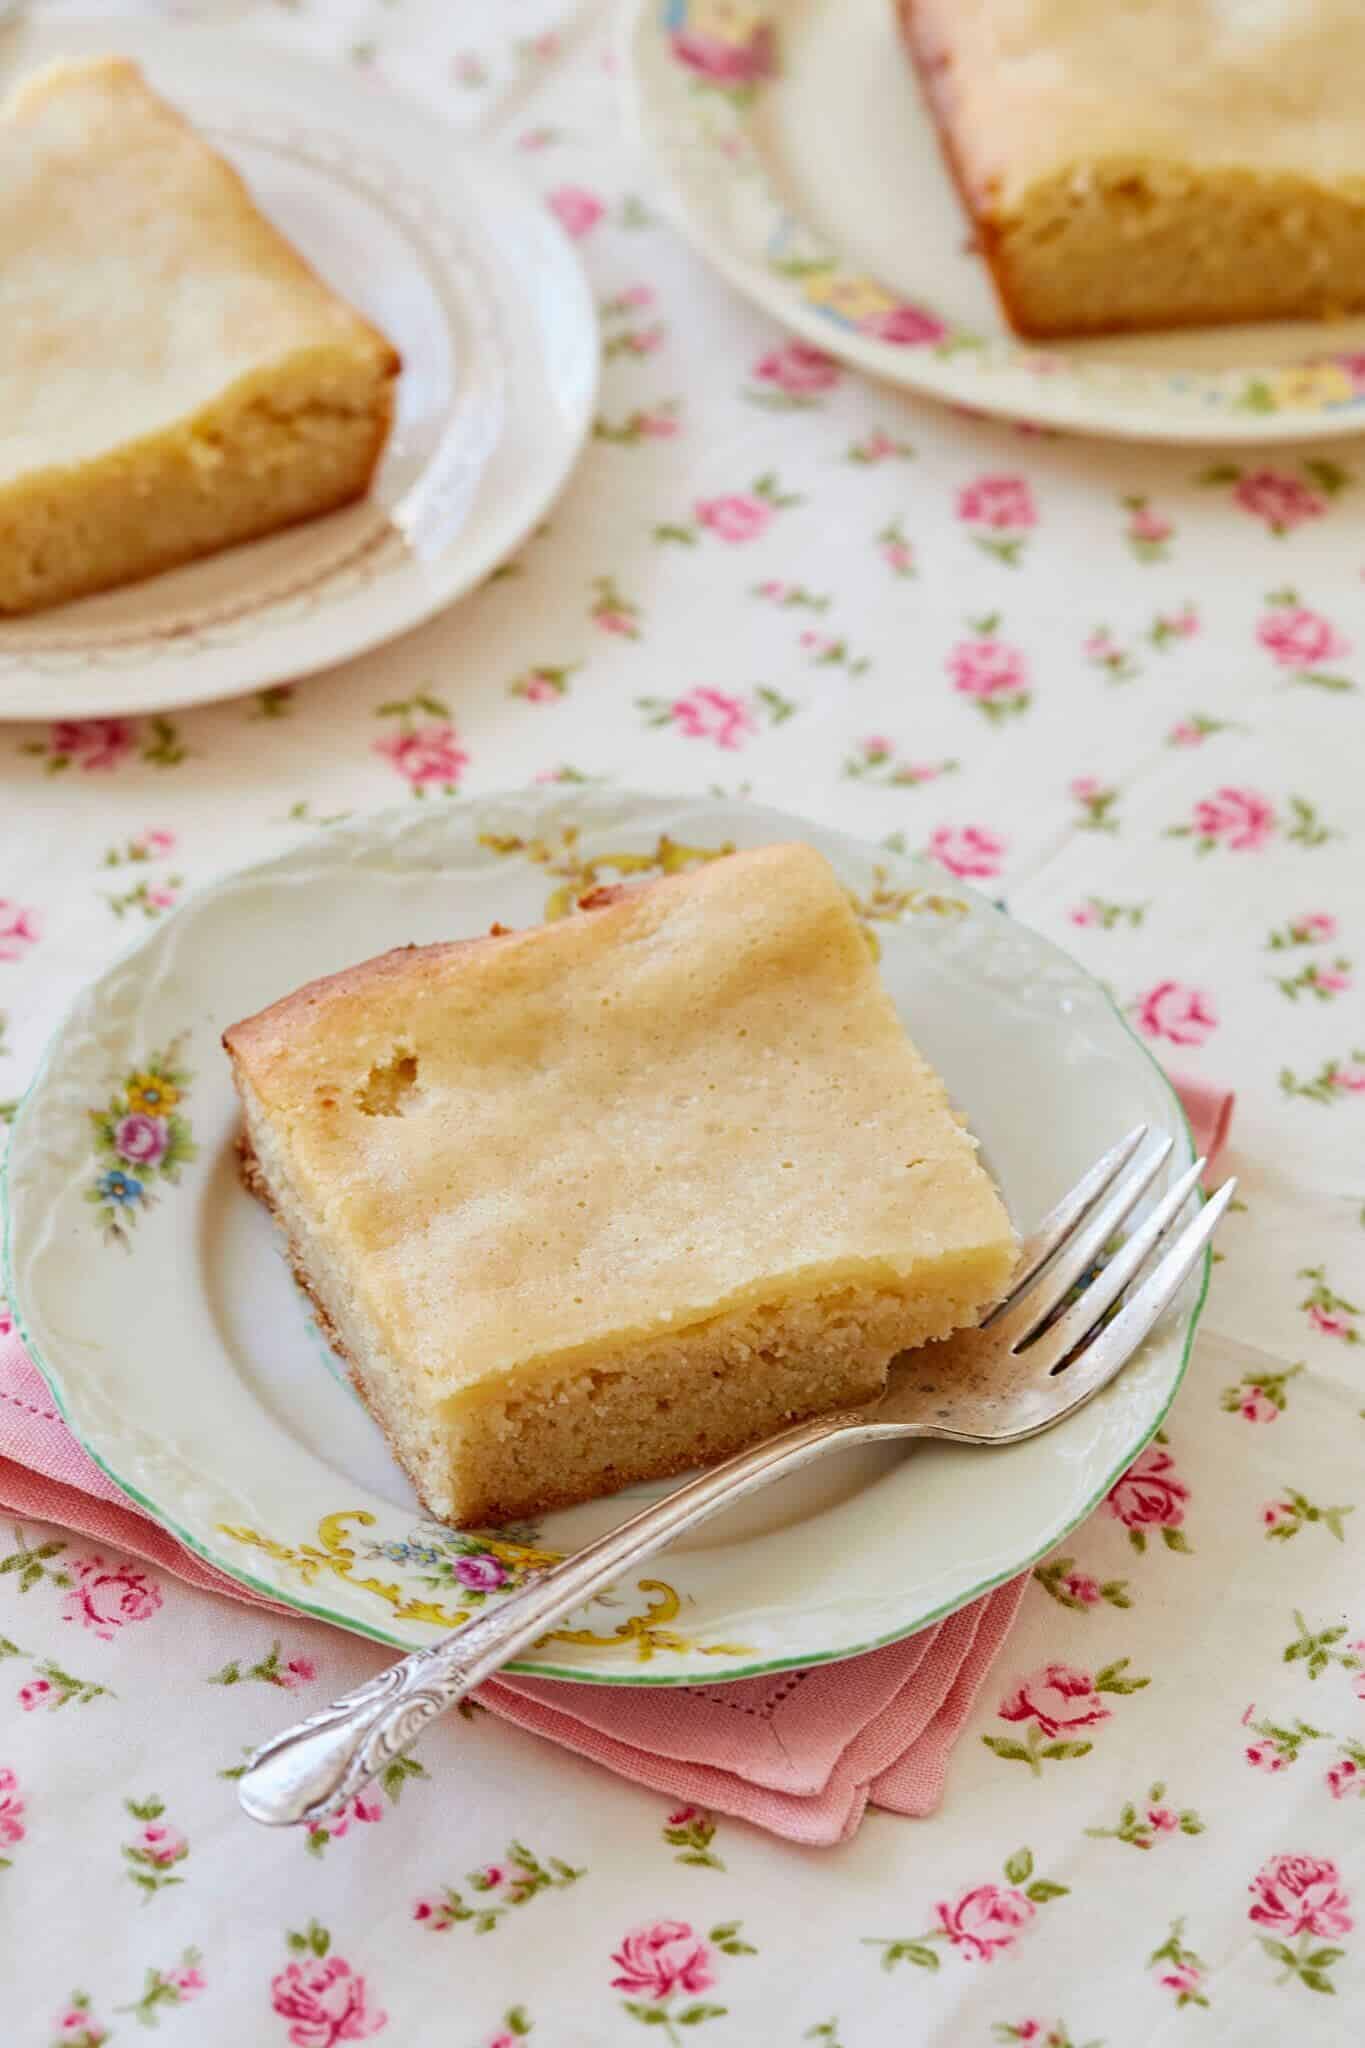 3 slices of Maple Gooey Butter cake are served on dessert plates. The cake looks moist and soft on the inside with a smooth top on the outside and with golden and slightly crispy edges. 